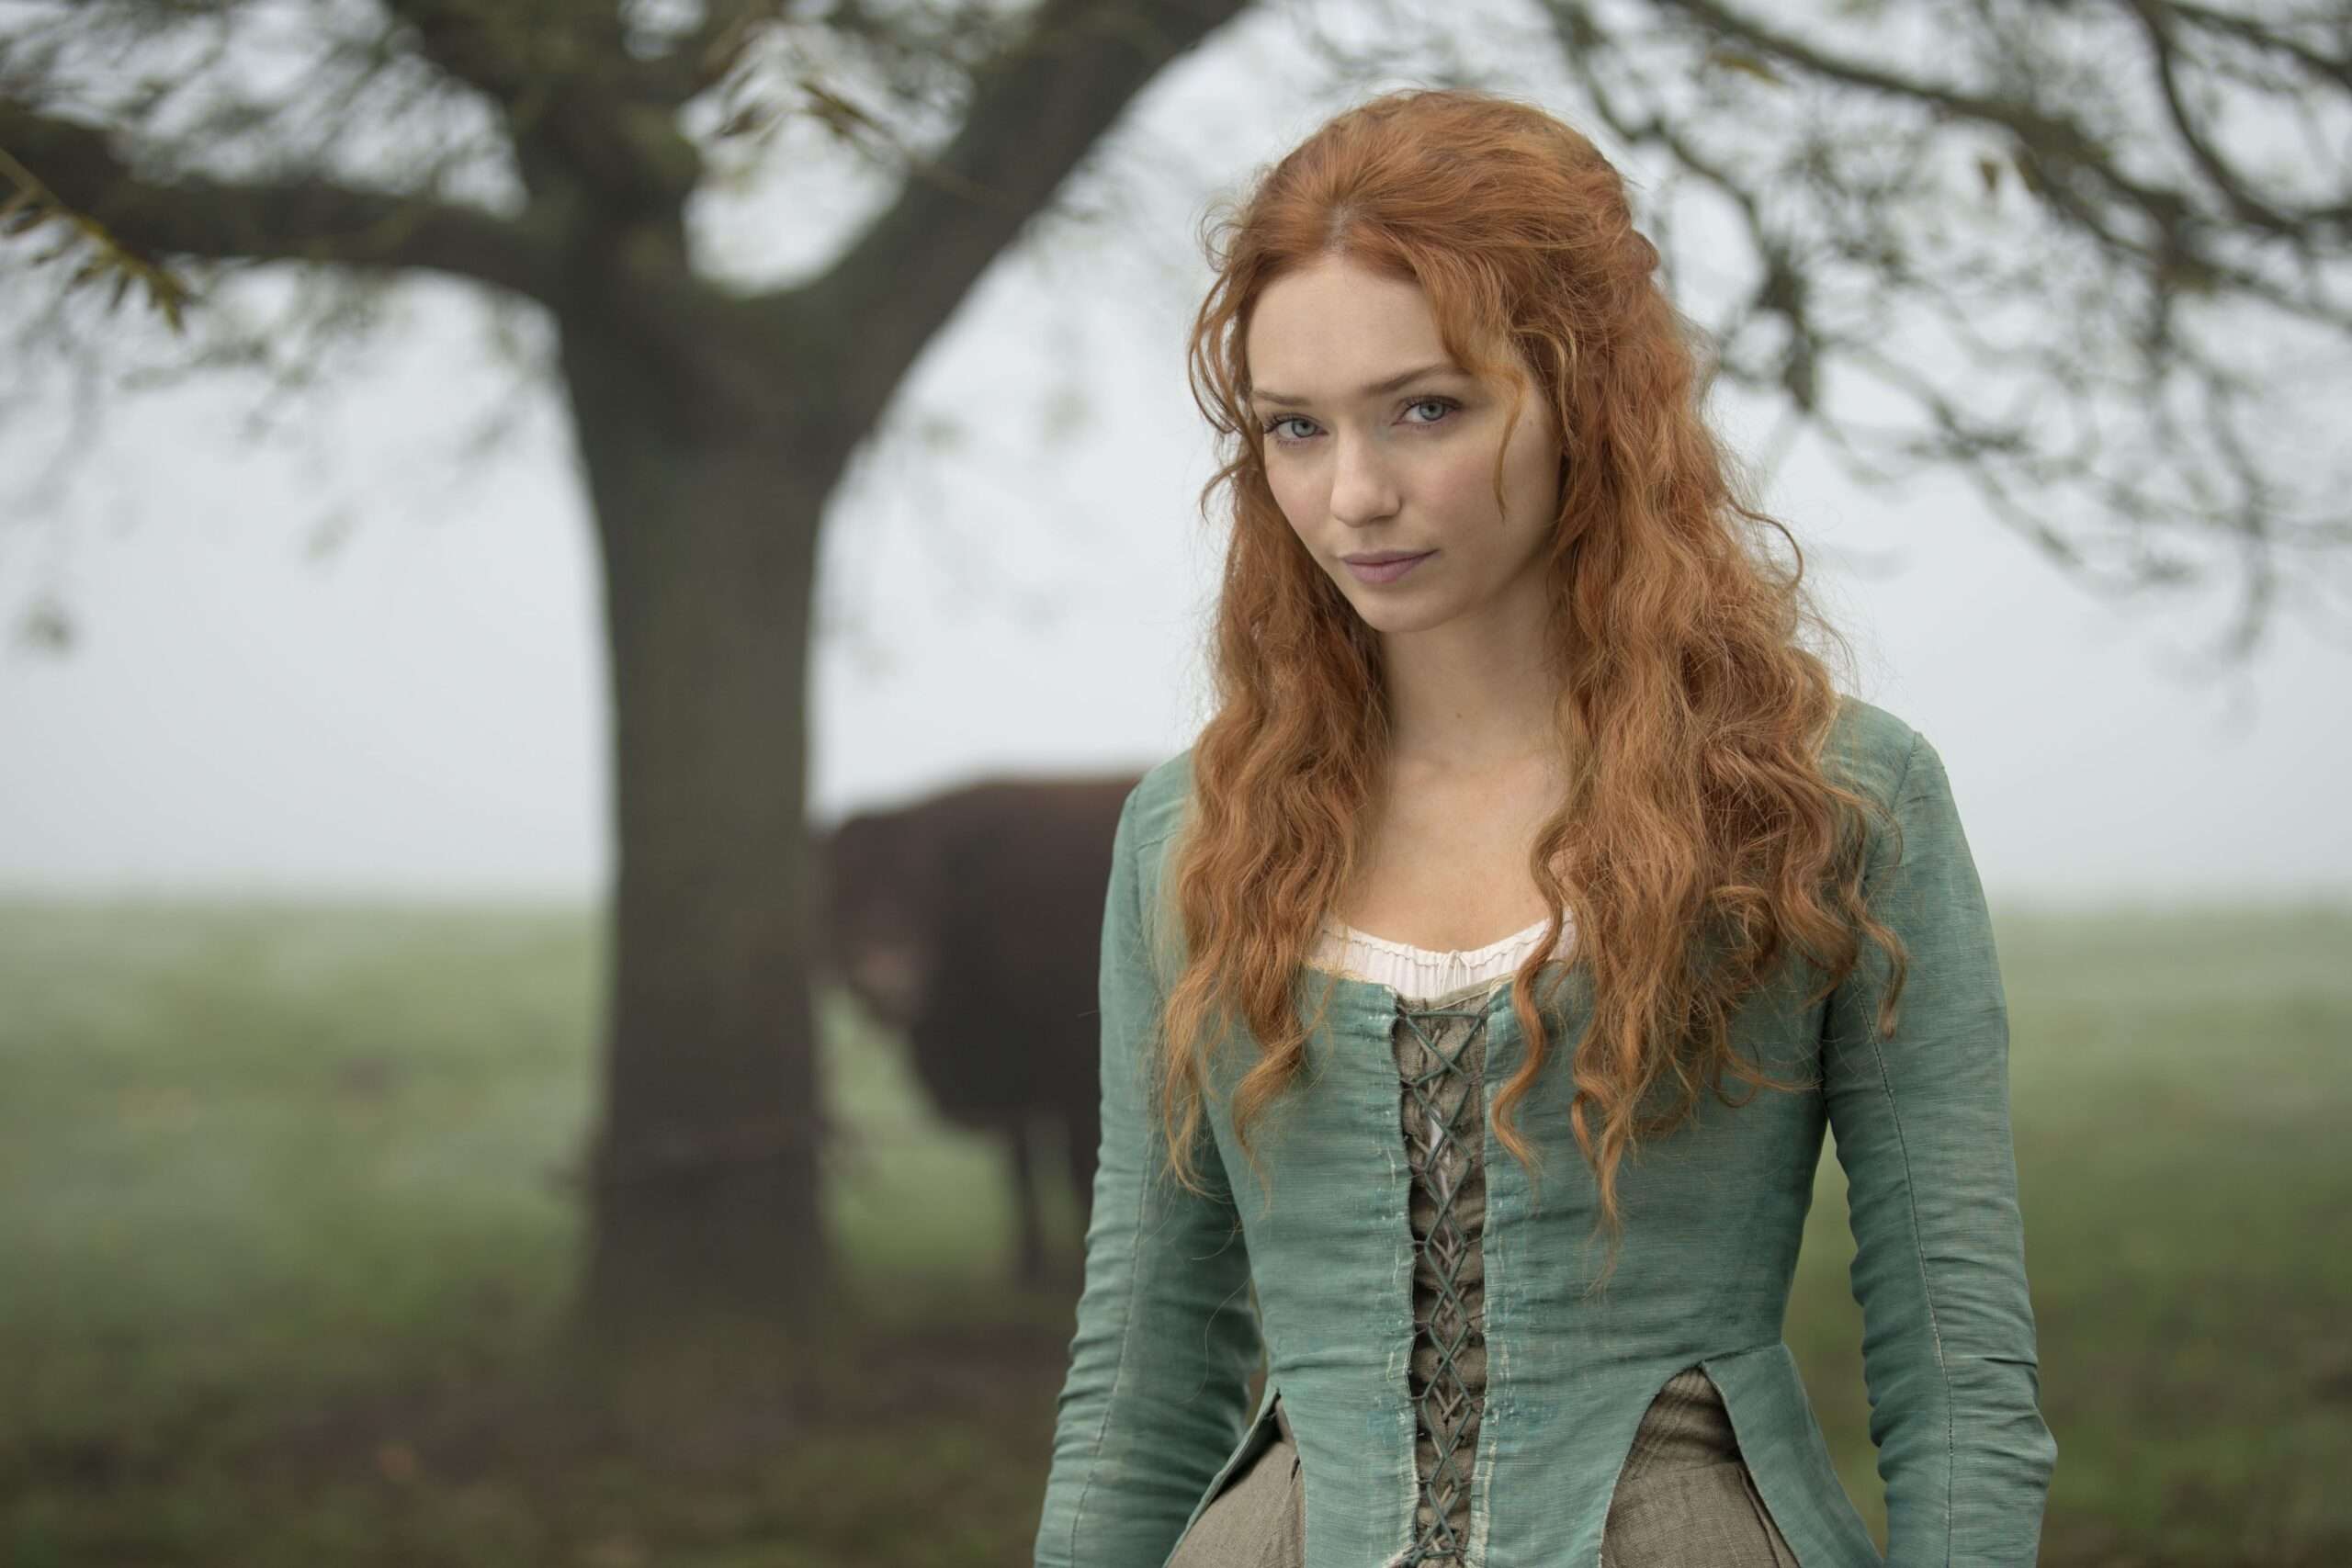 Eleanor Tomlinson Biography: Age, Spouse, Net Worth, Movies, TV Shows, Wiki, Children, Parents